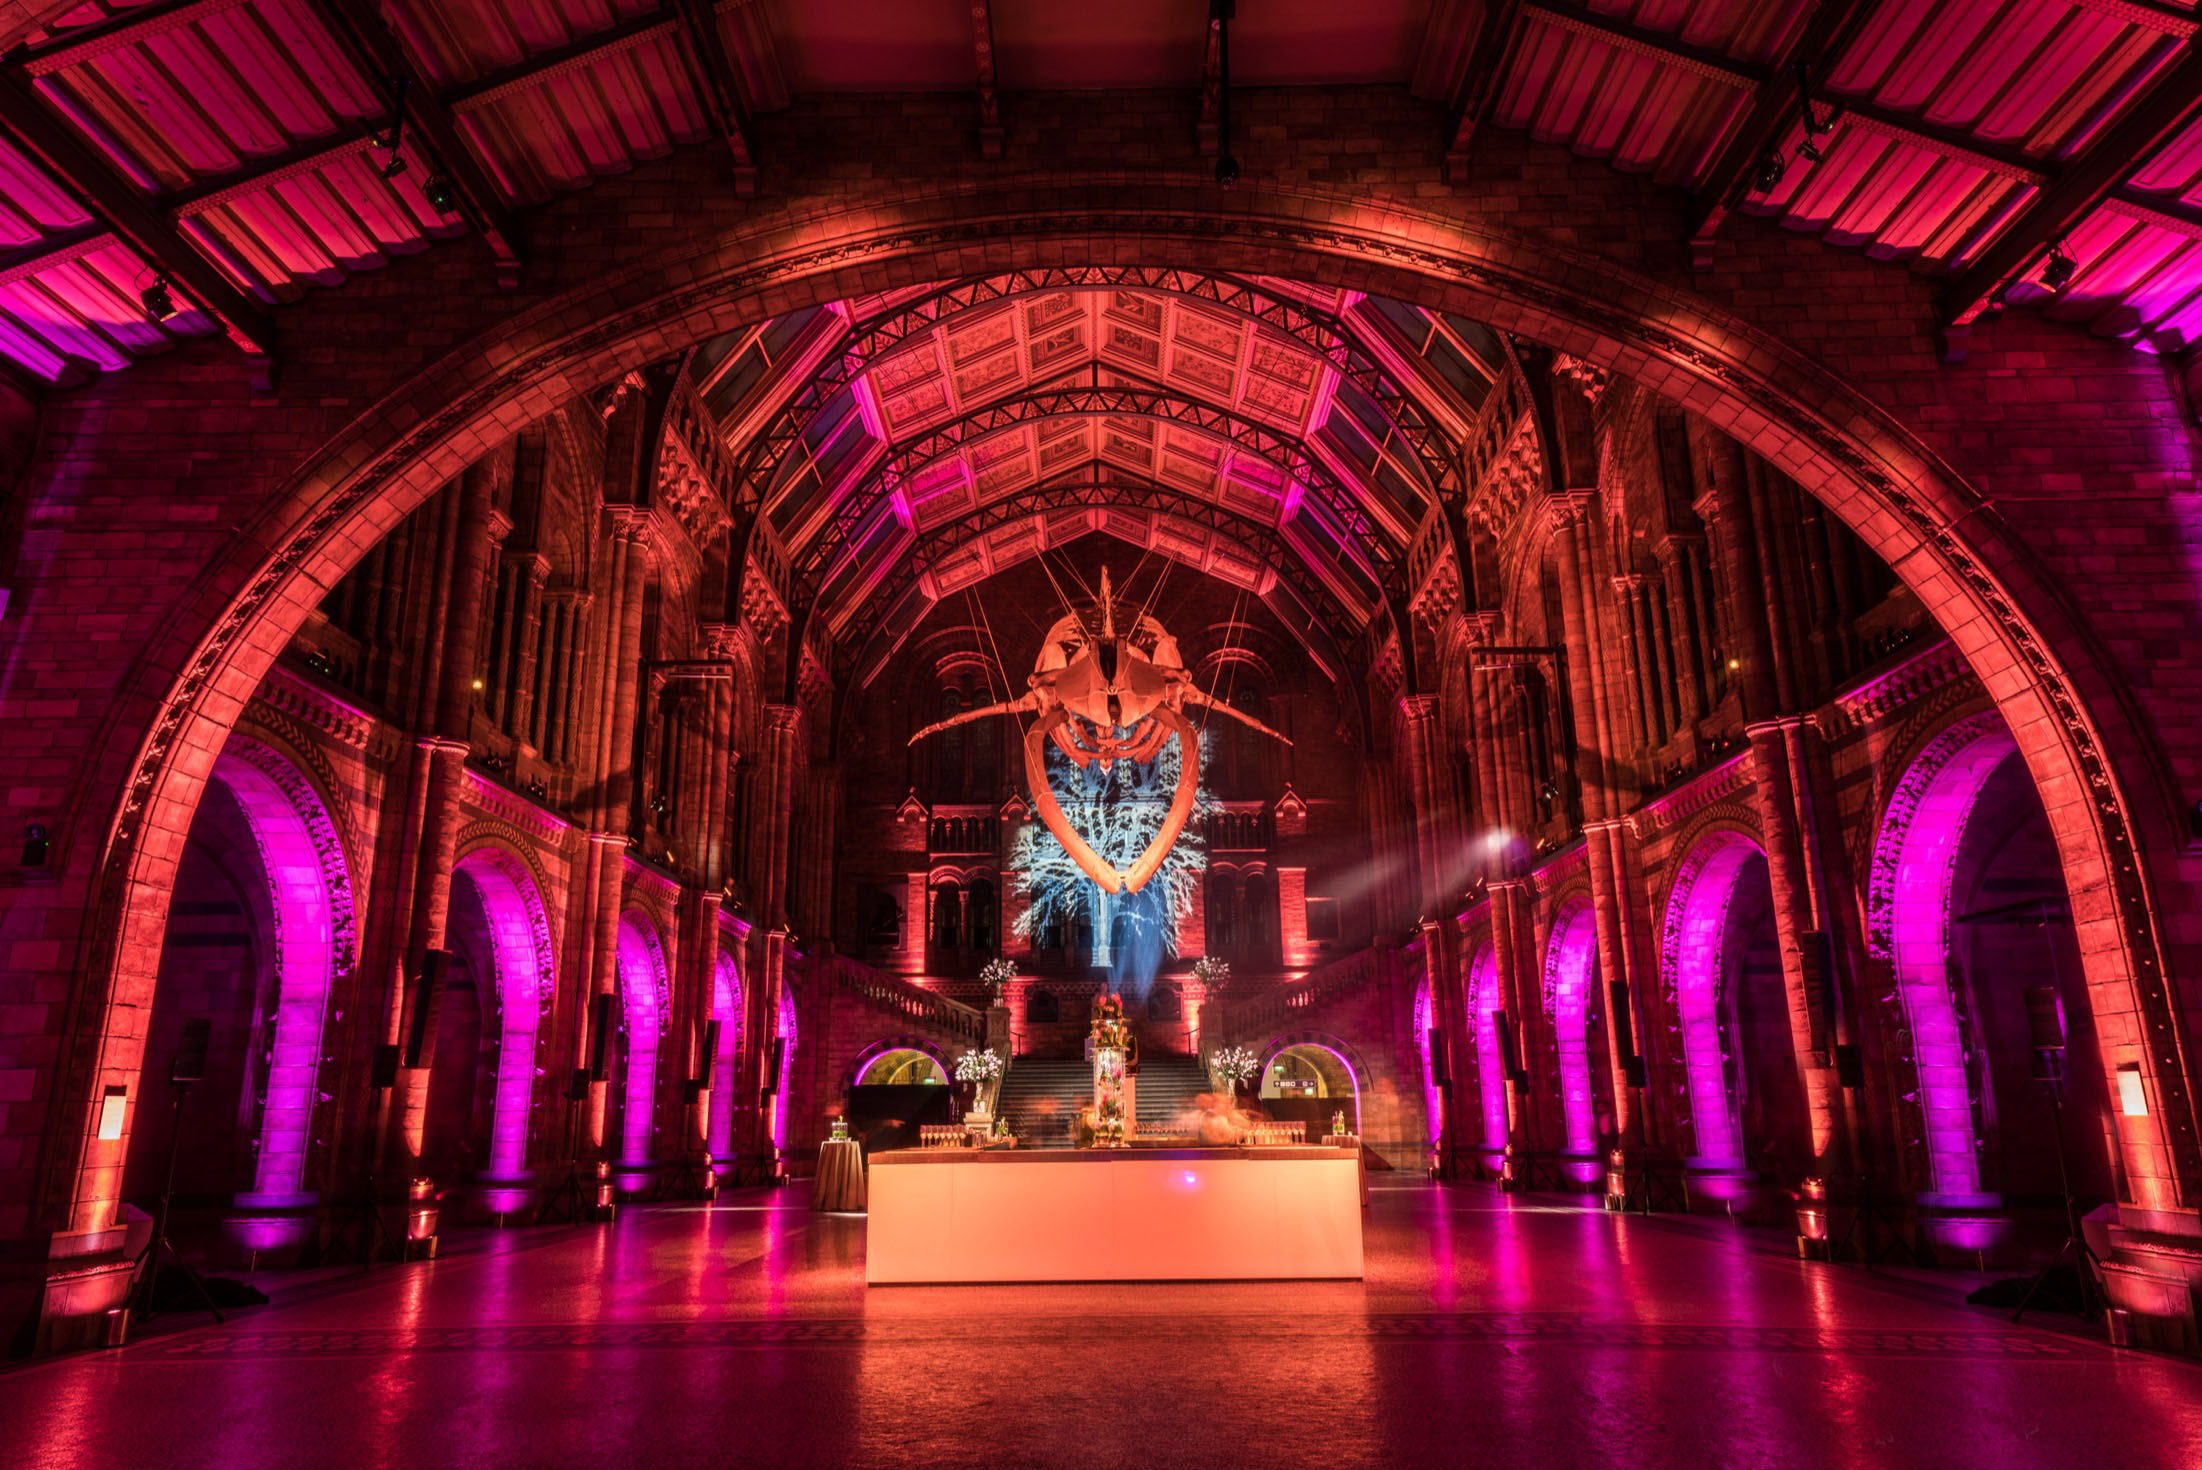 Credit: Bespoke Events - Natural History Museum